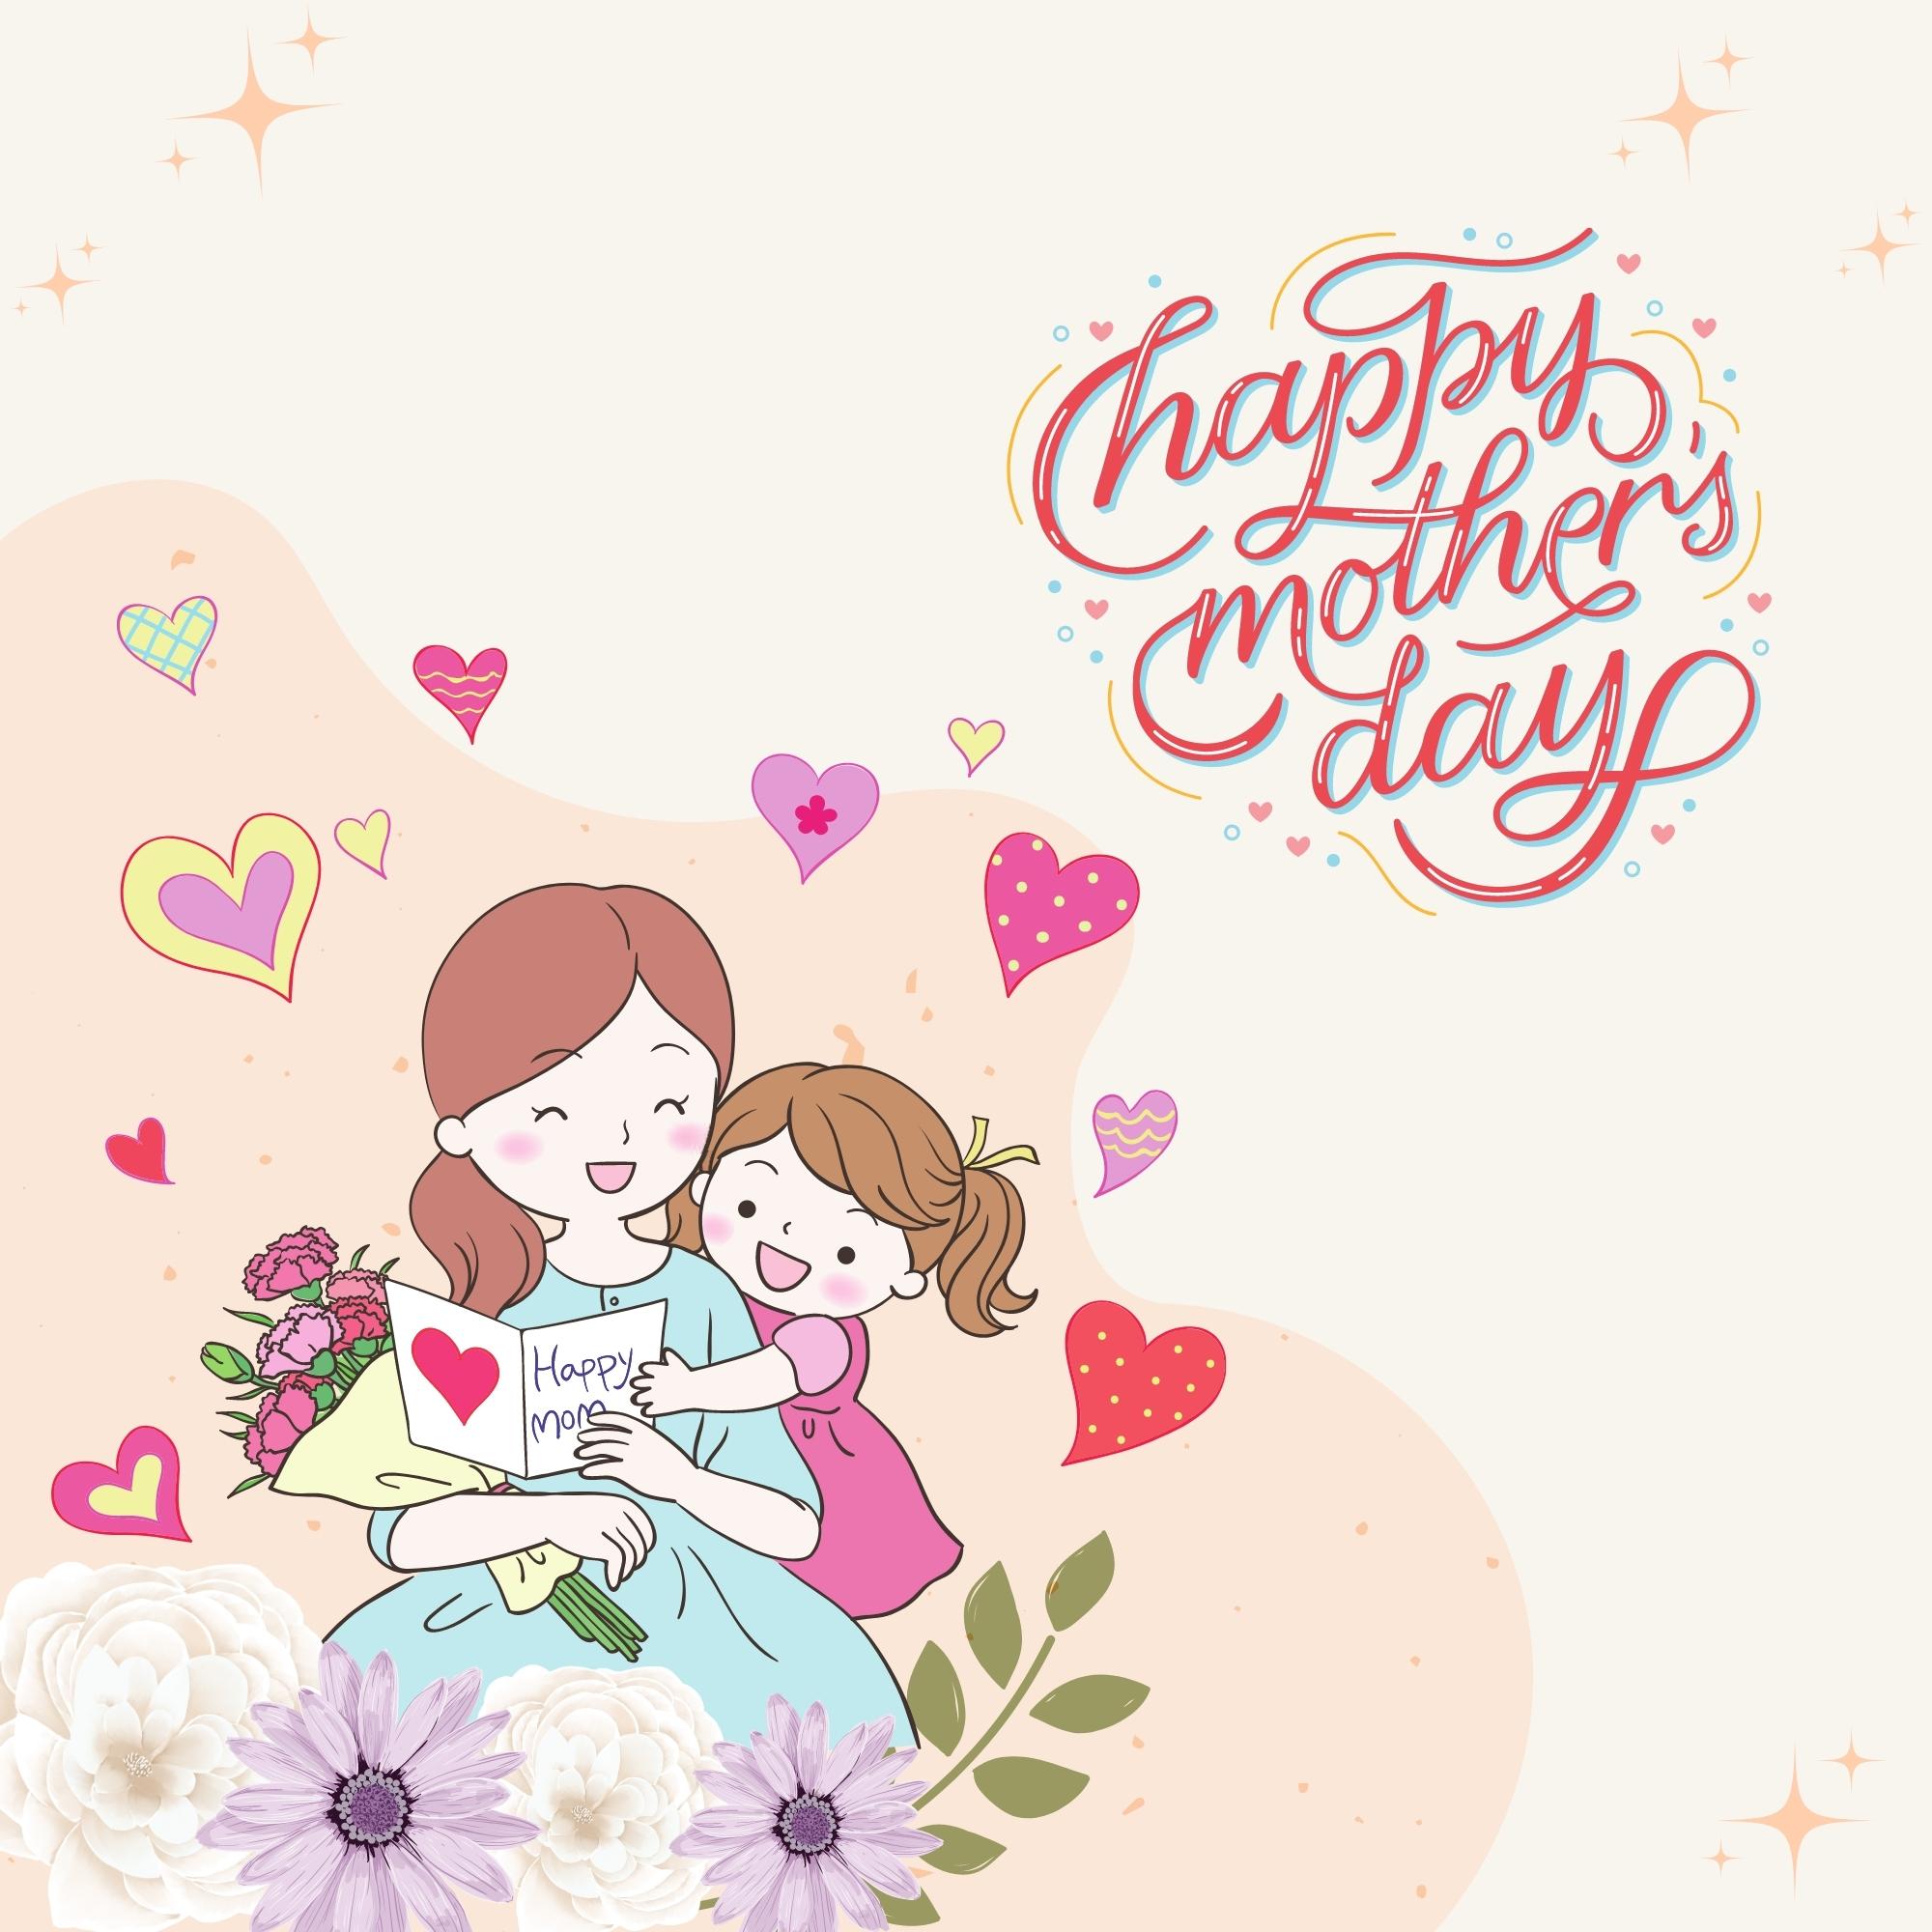 Happy Mothers Day Images | 1040 | Free Download [8k,4k,Hd]